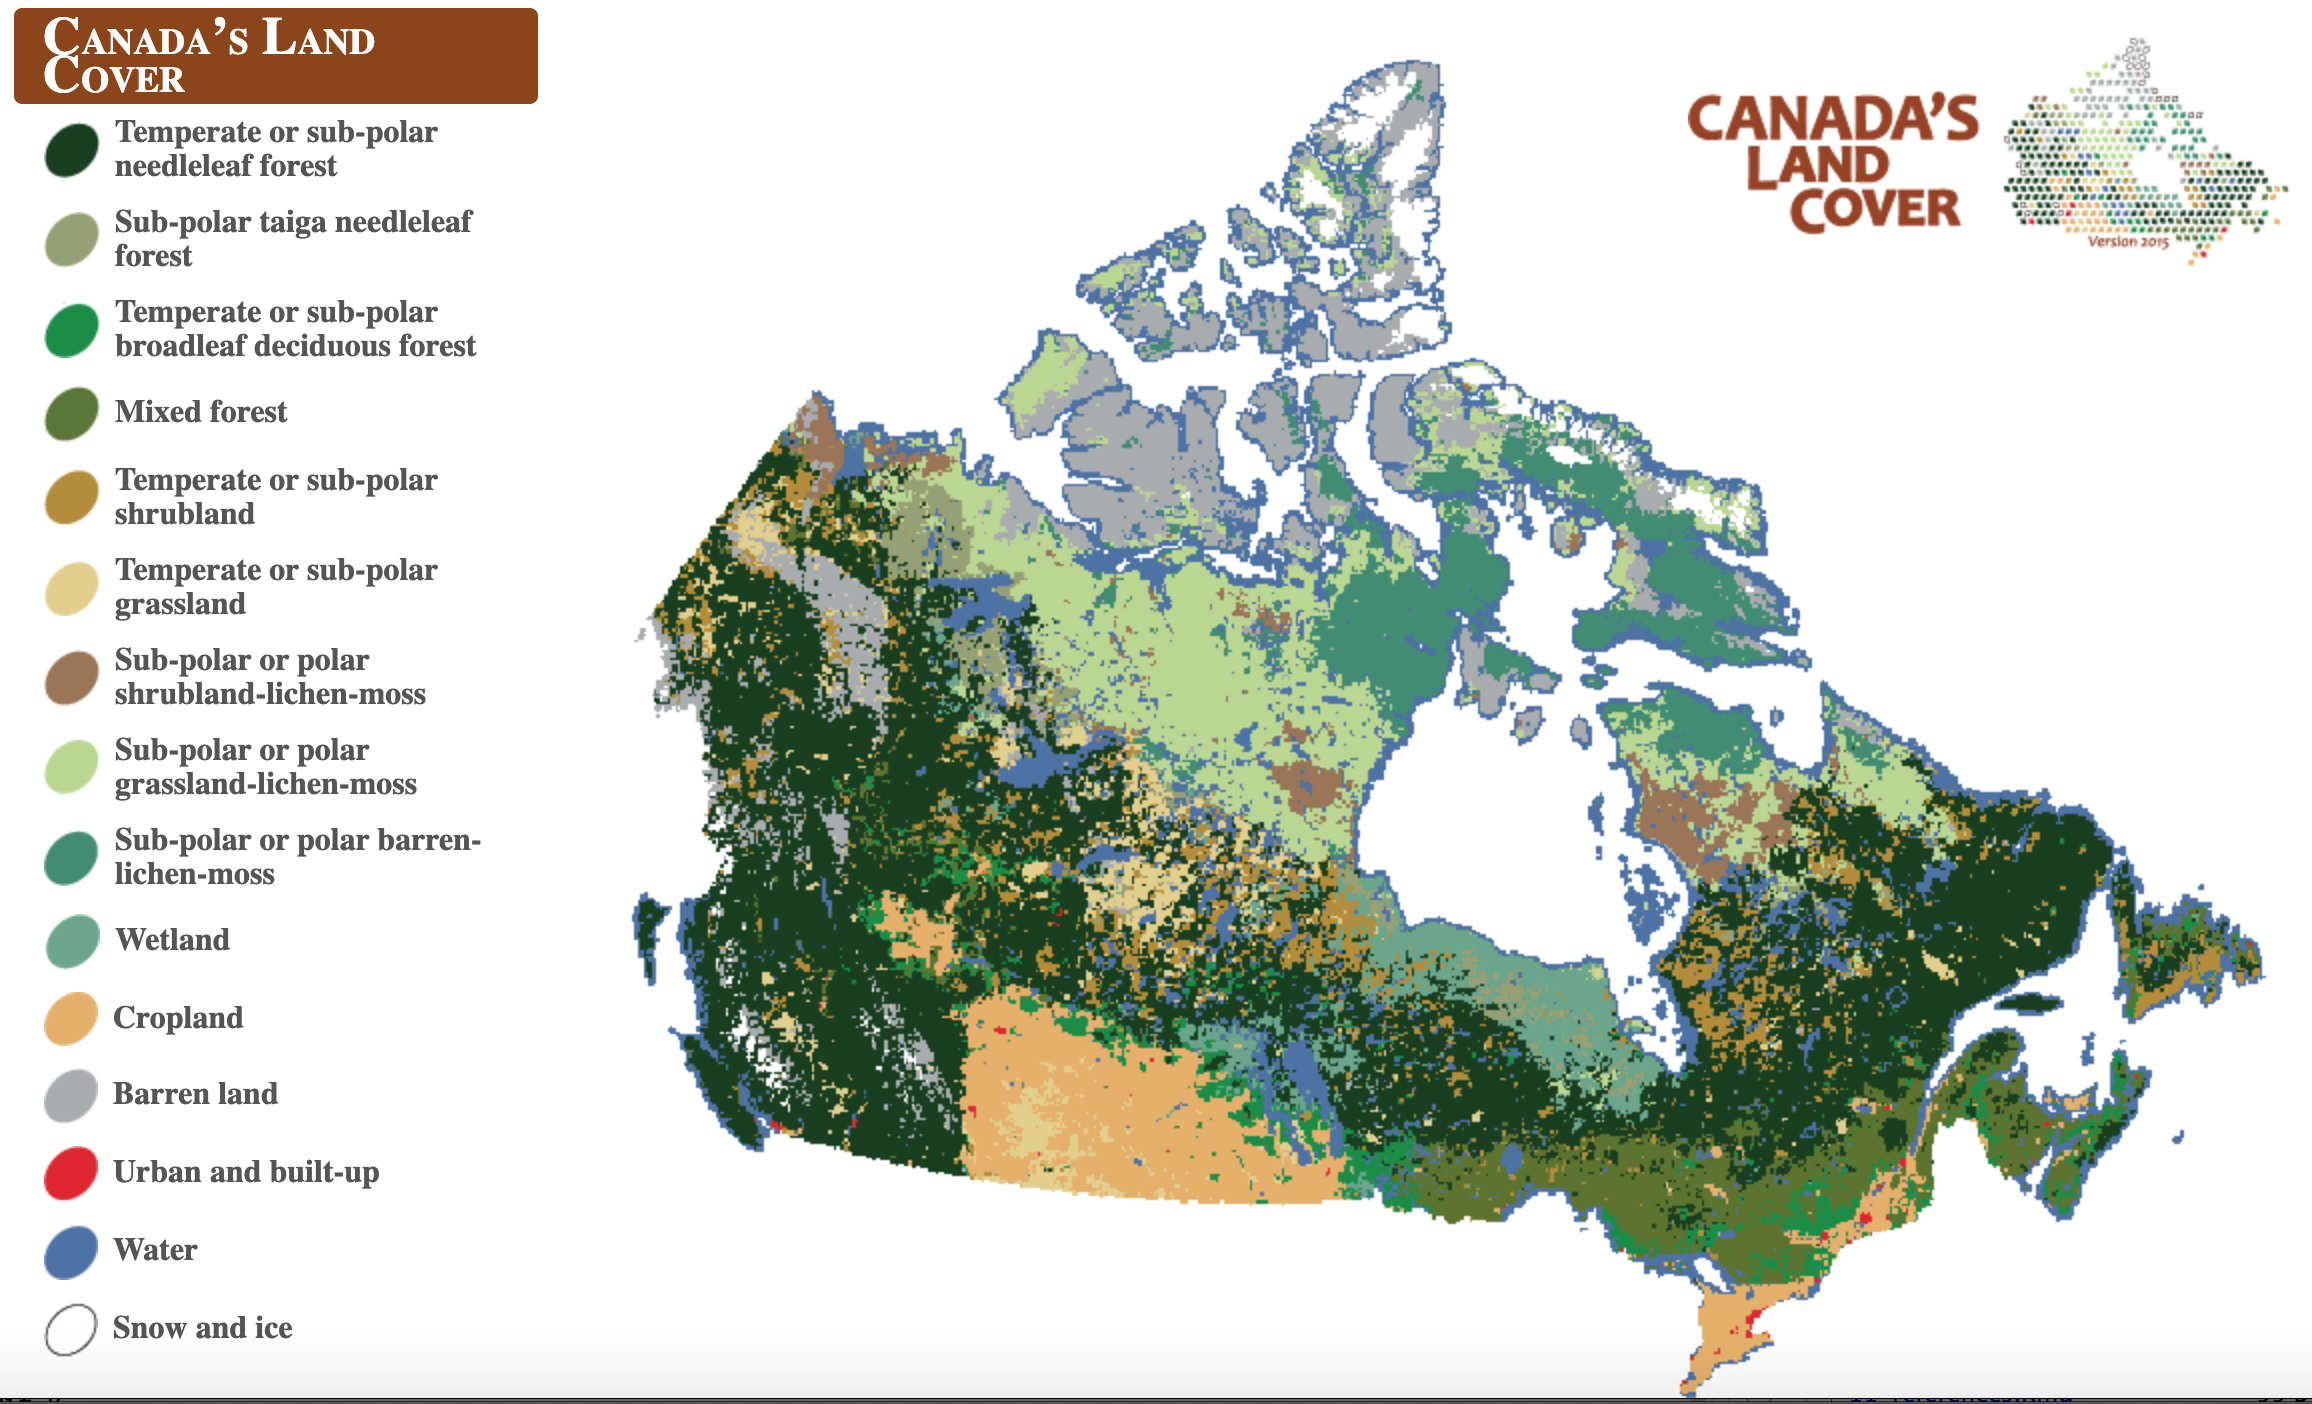 Canada landcover map, 2015, derived from satellite imagery. Source: Natural Resources Canada. Screenshot taken by Colin Robertson. Used with permission.